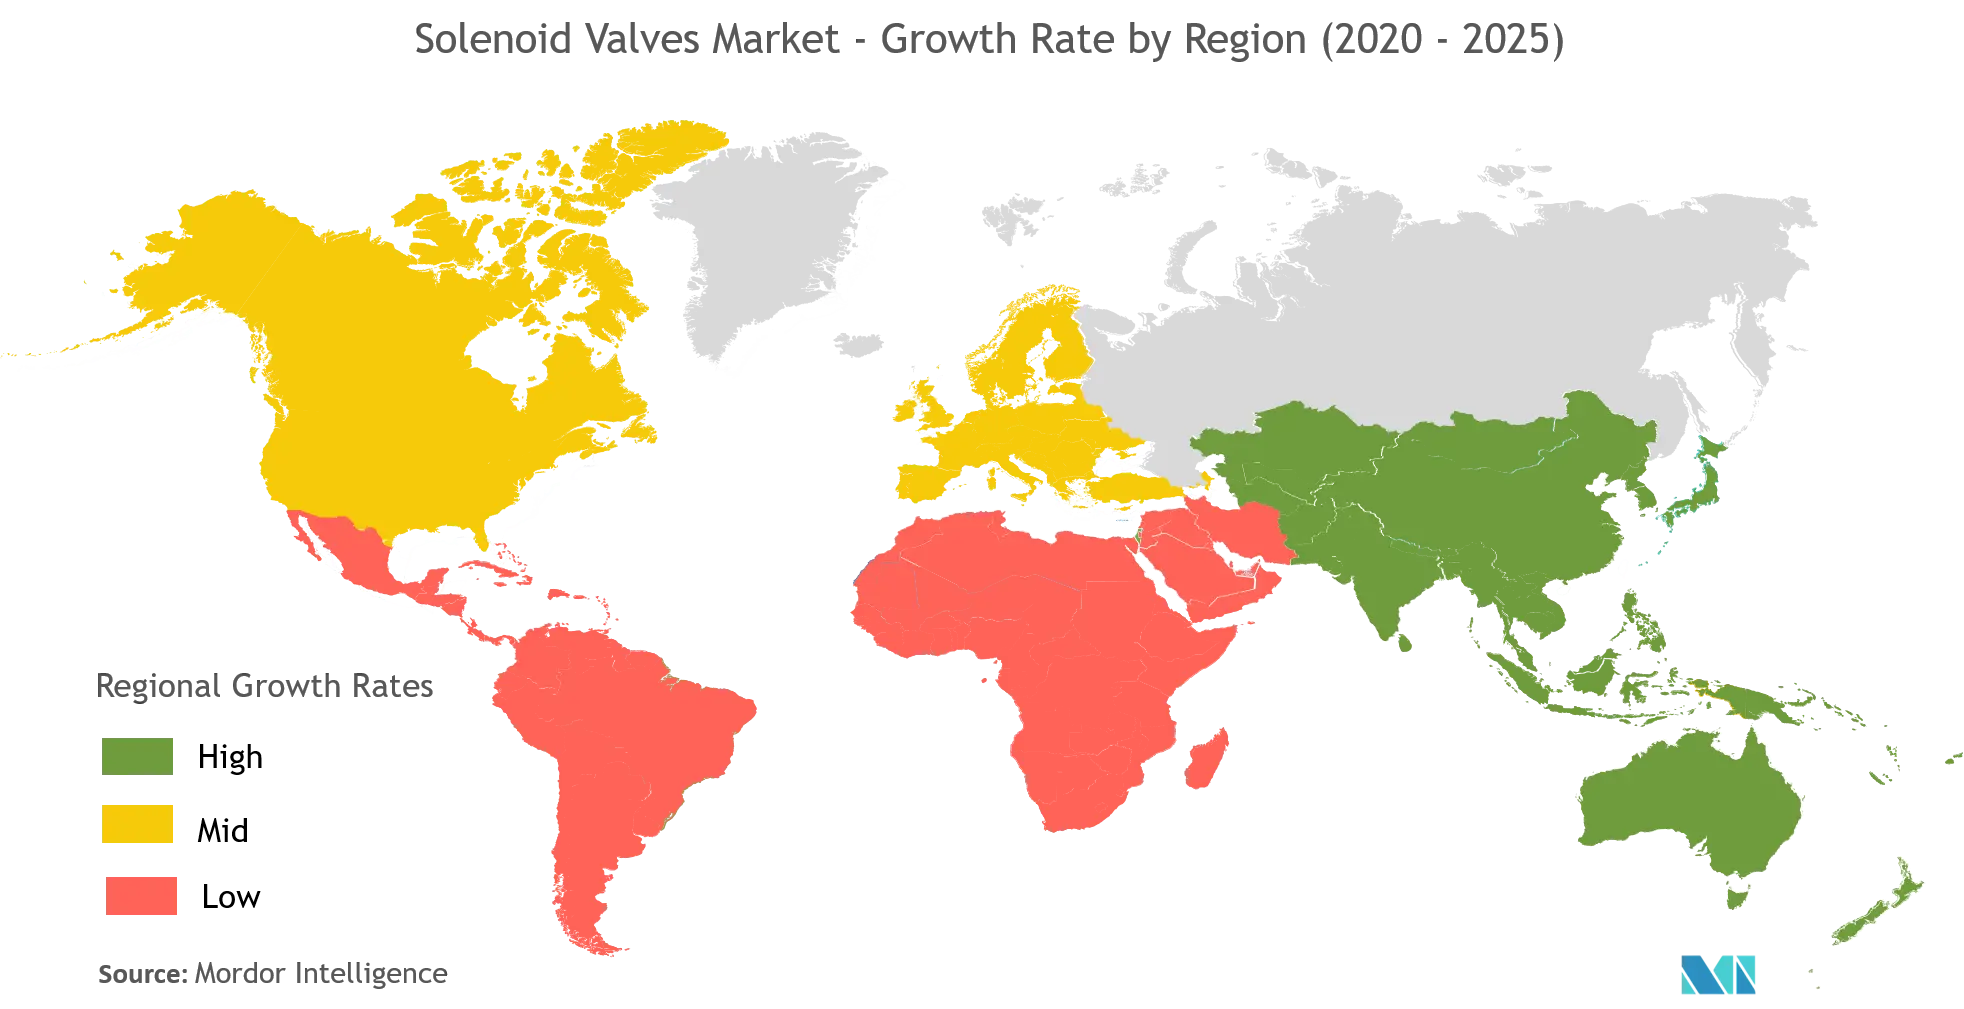 Solenoid Valves Market: Growth Rate by Region (2020 - 2025)